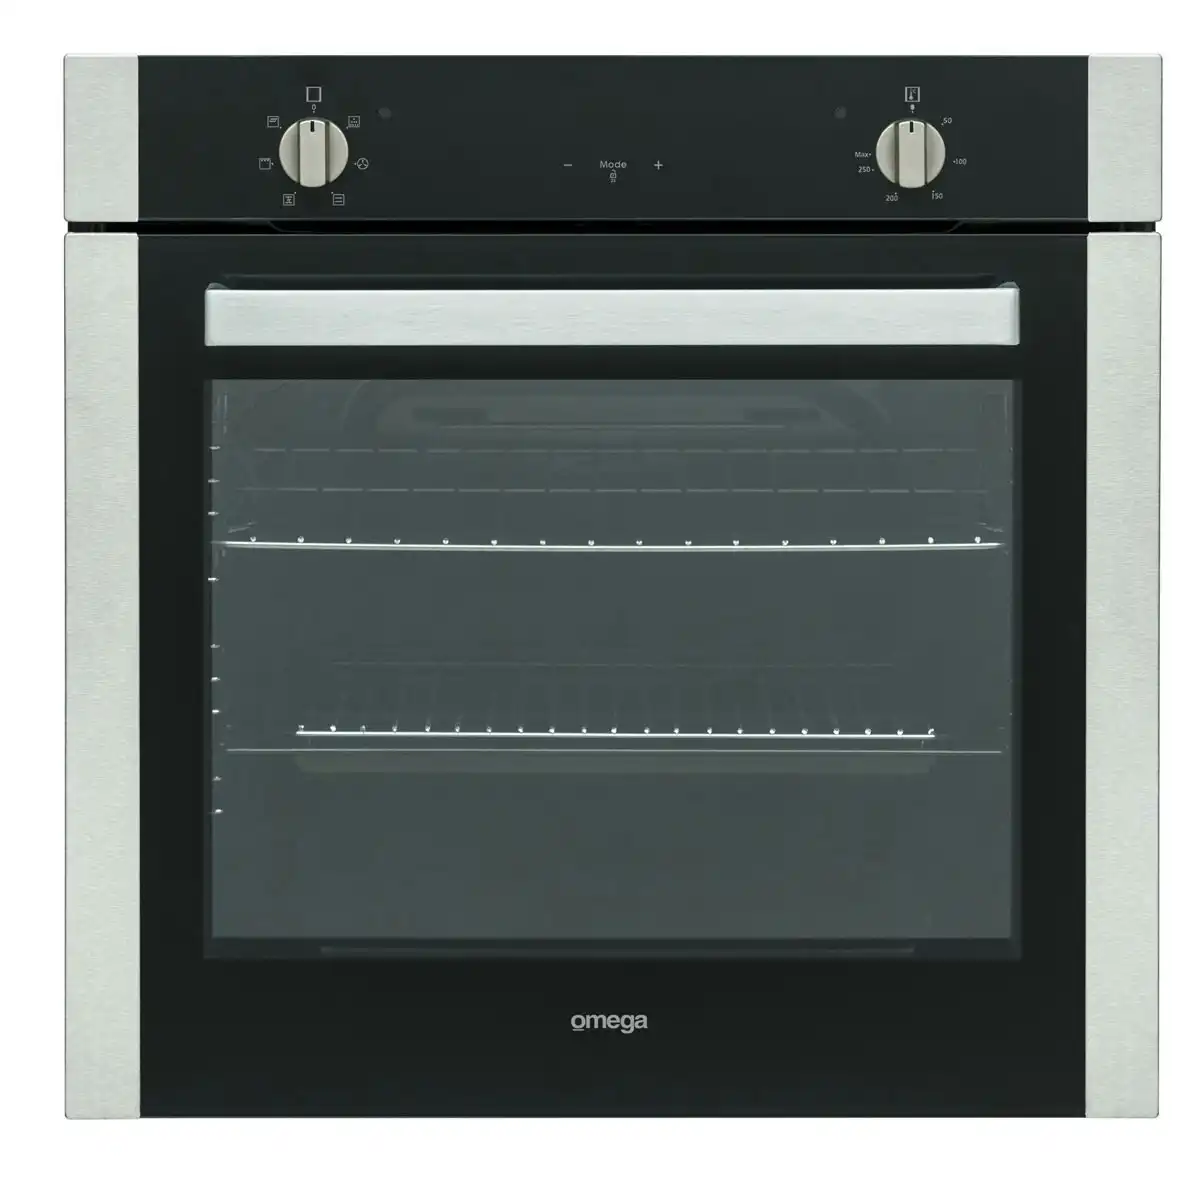 Omega 60cm Electric Built-in Oven